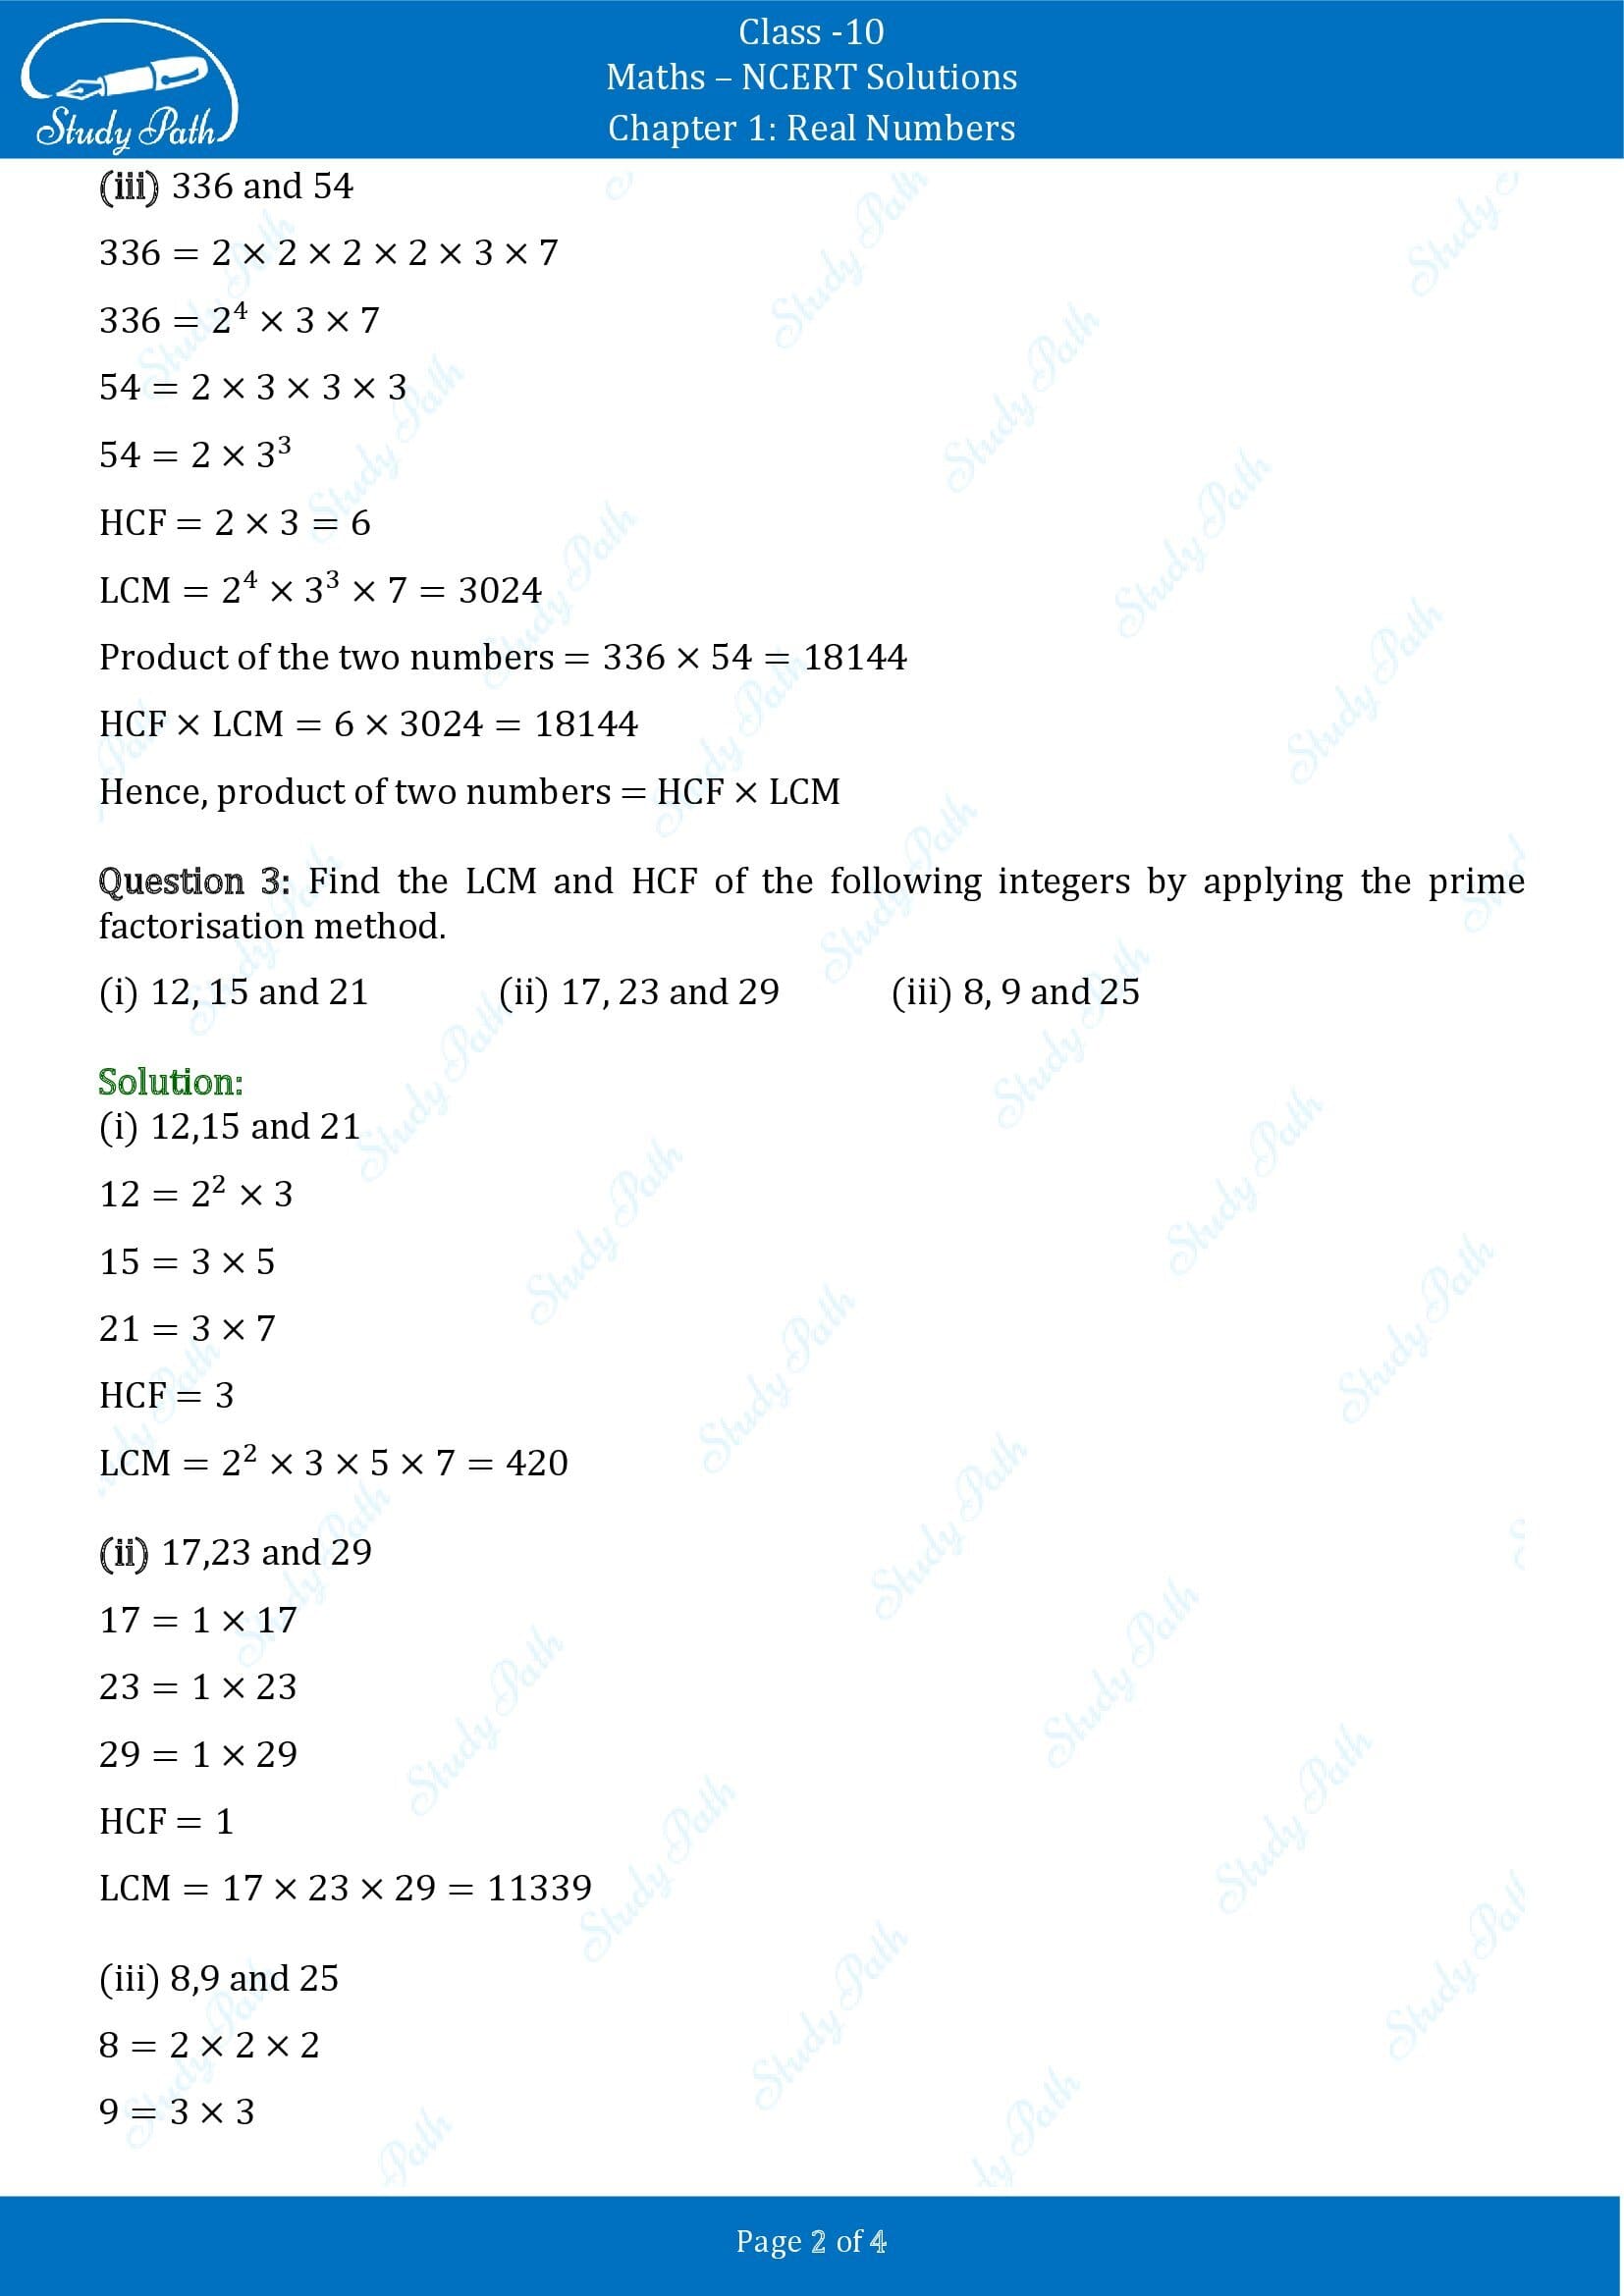 NCERT Solutions for Class 10 Maths Chapter 1 Real Numbers Exercise 1.2 00002